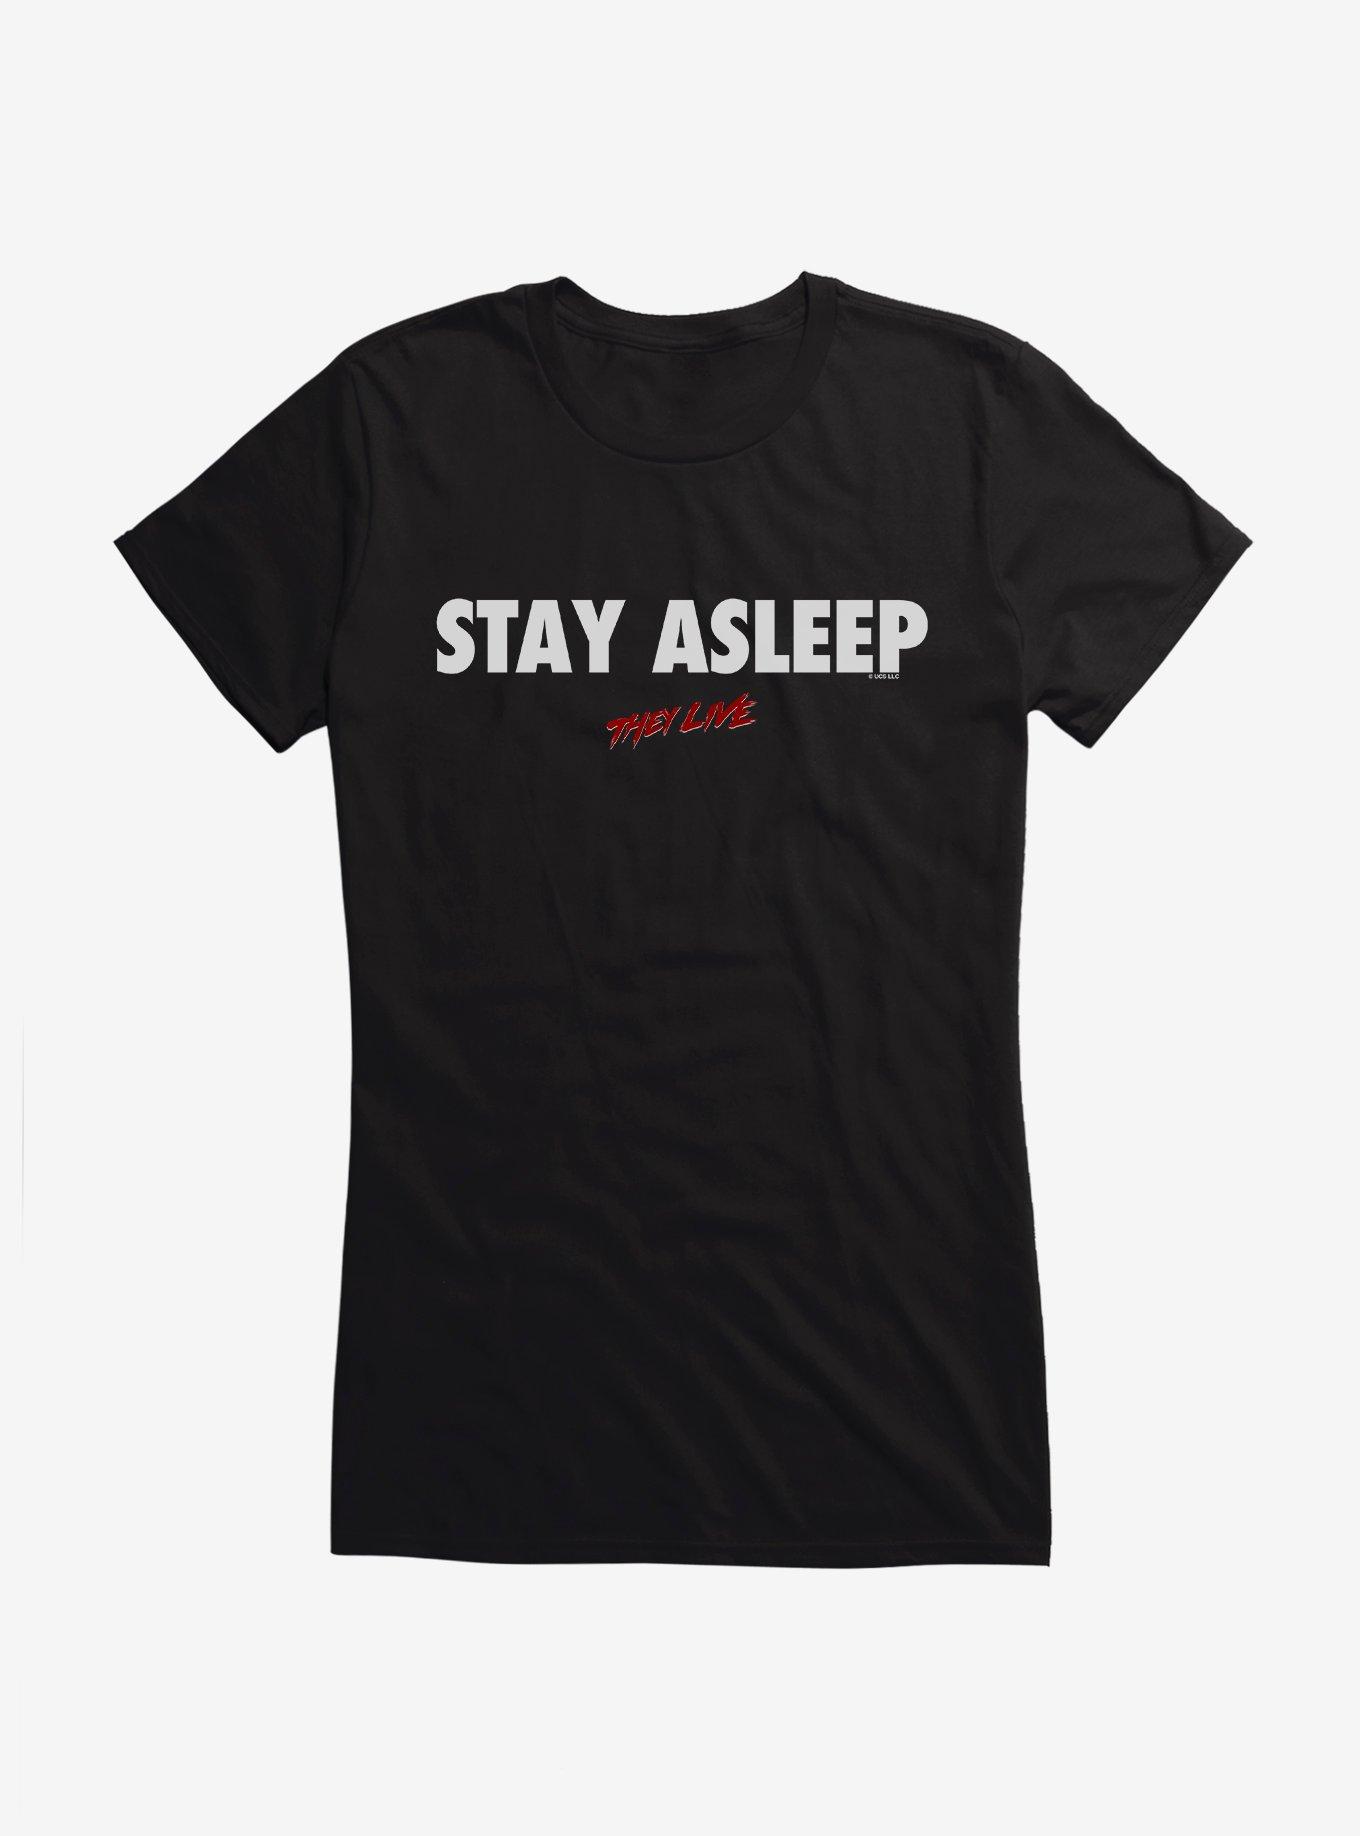 They Live Stay Asleep Girls T-Shirt